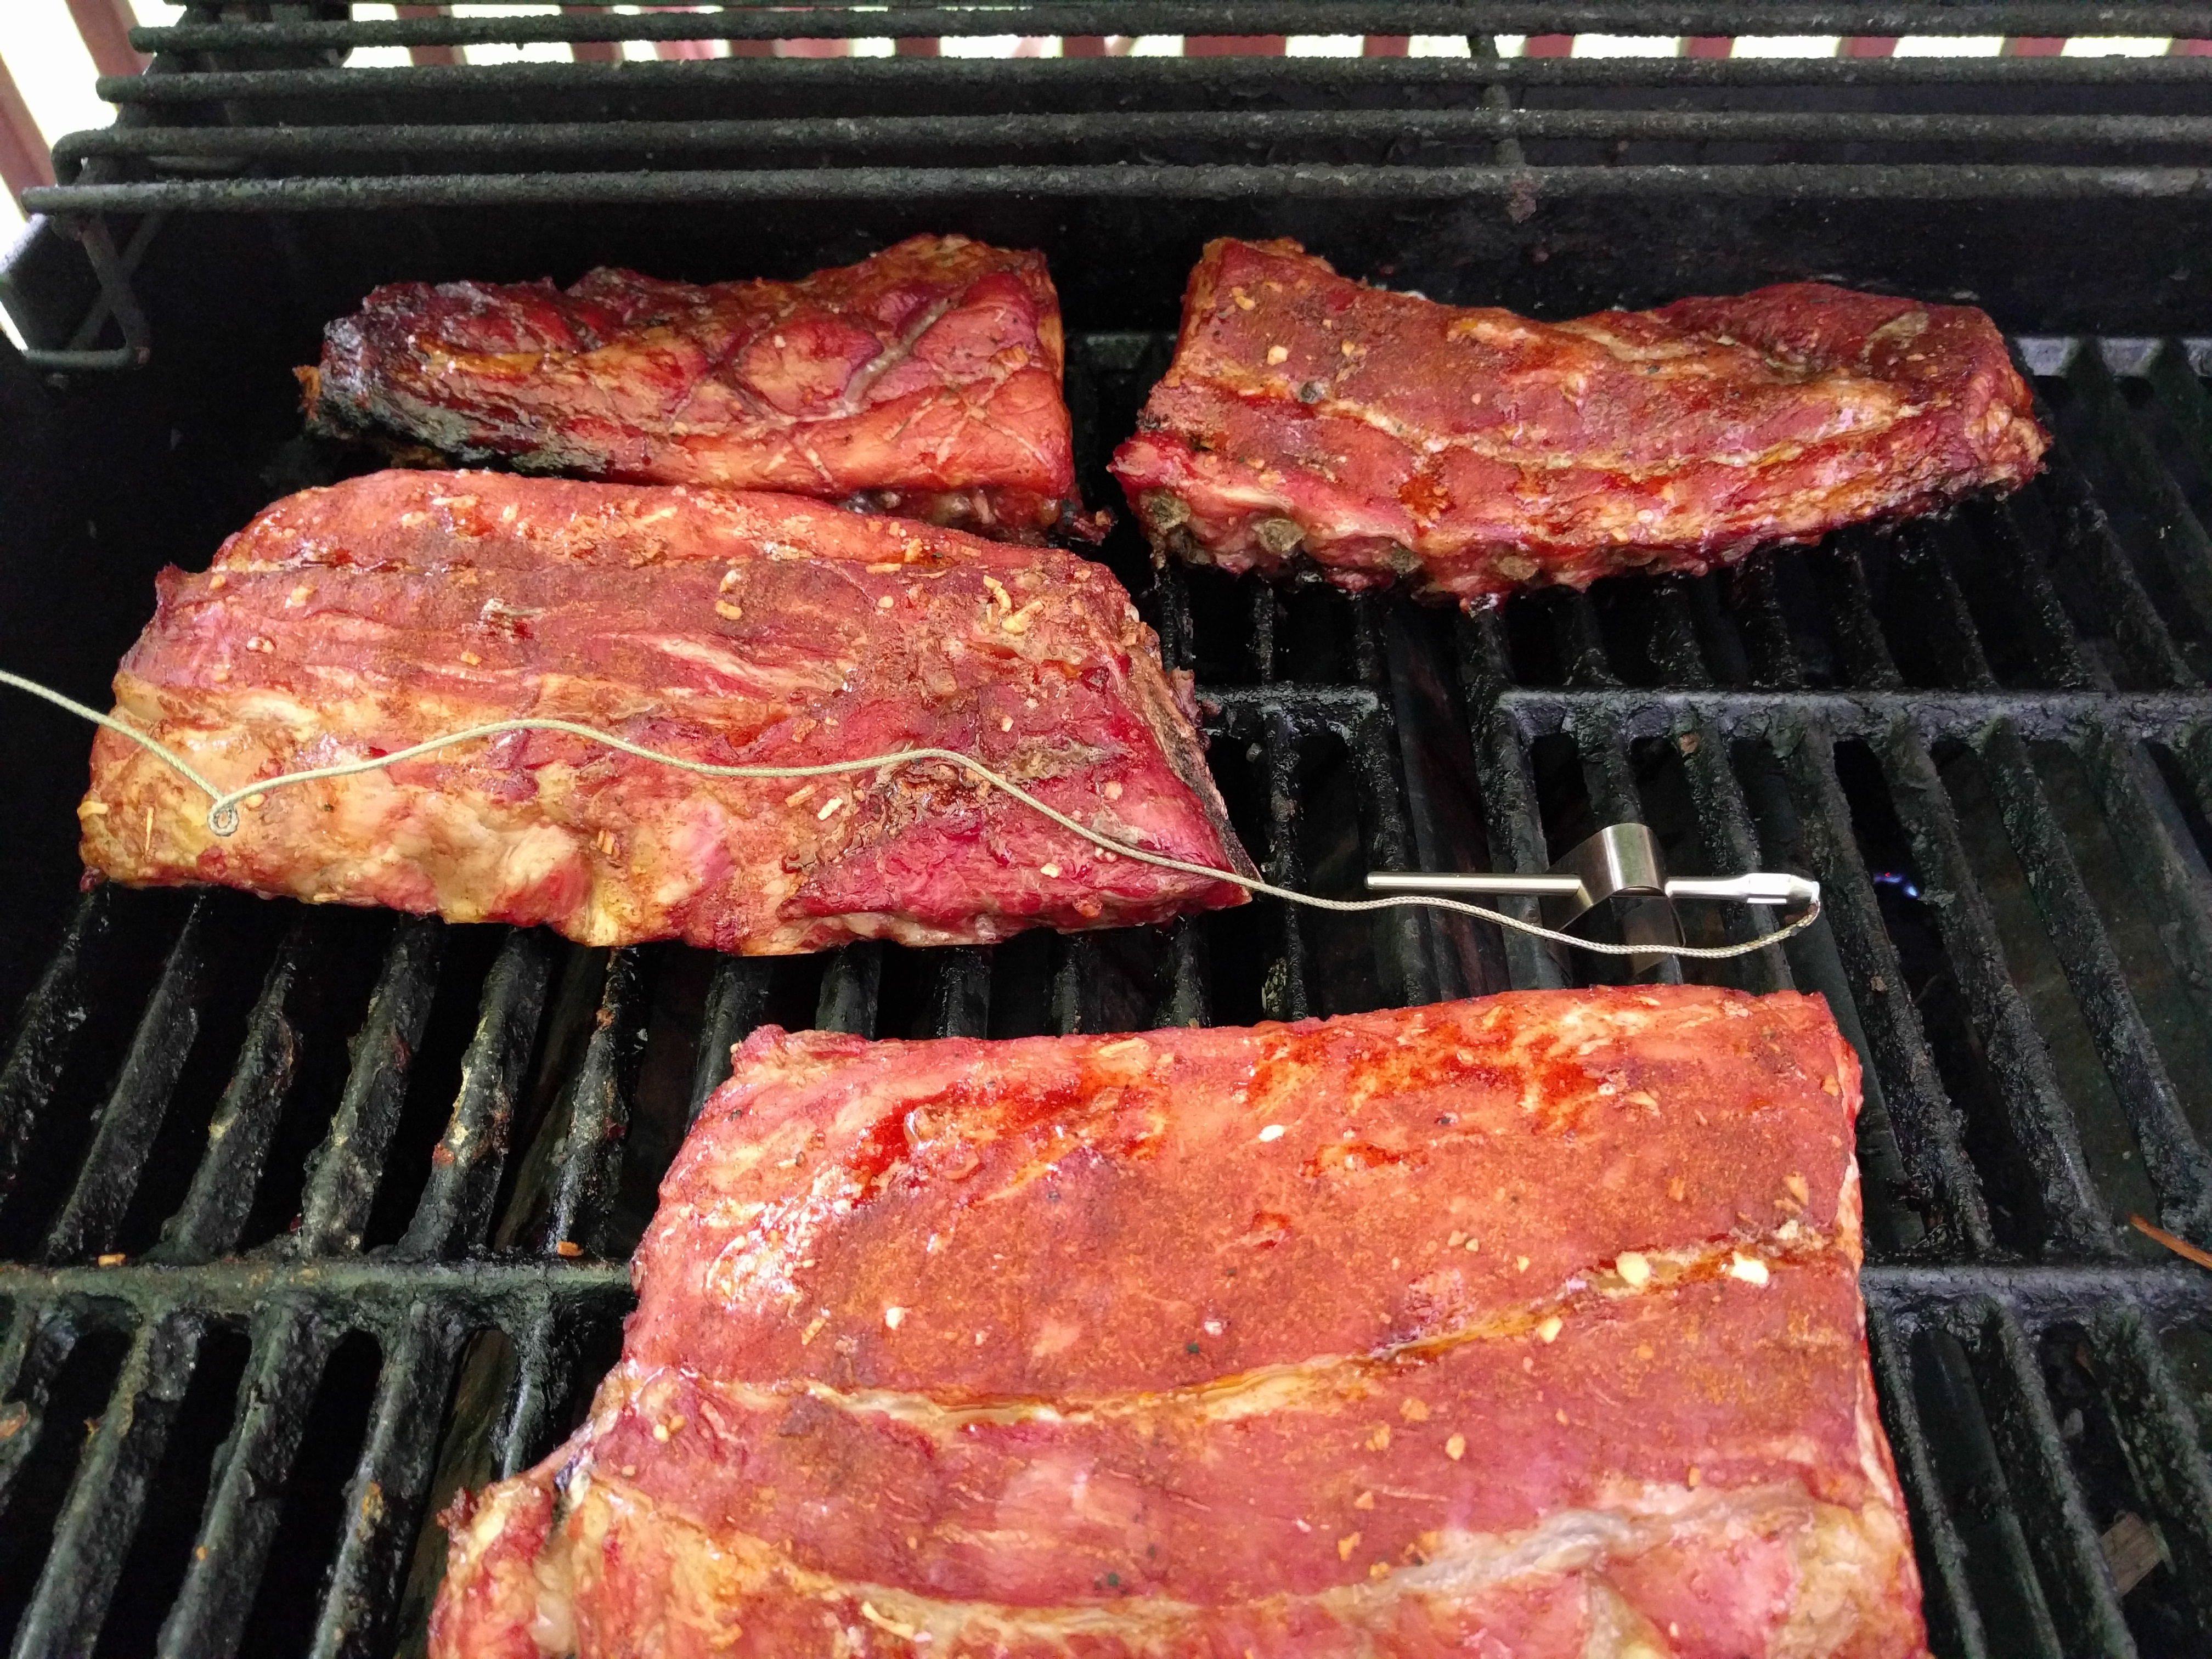 Ribs on the grill with the thermometer probe